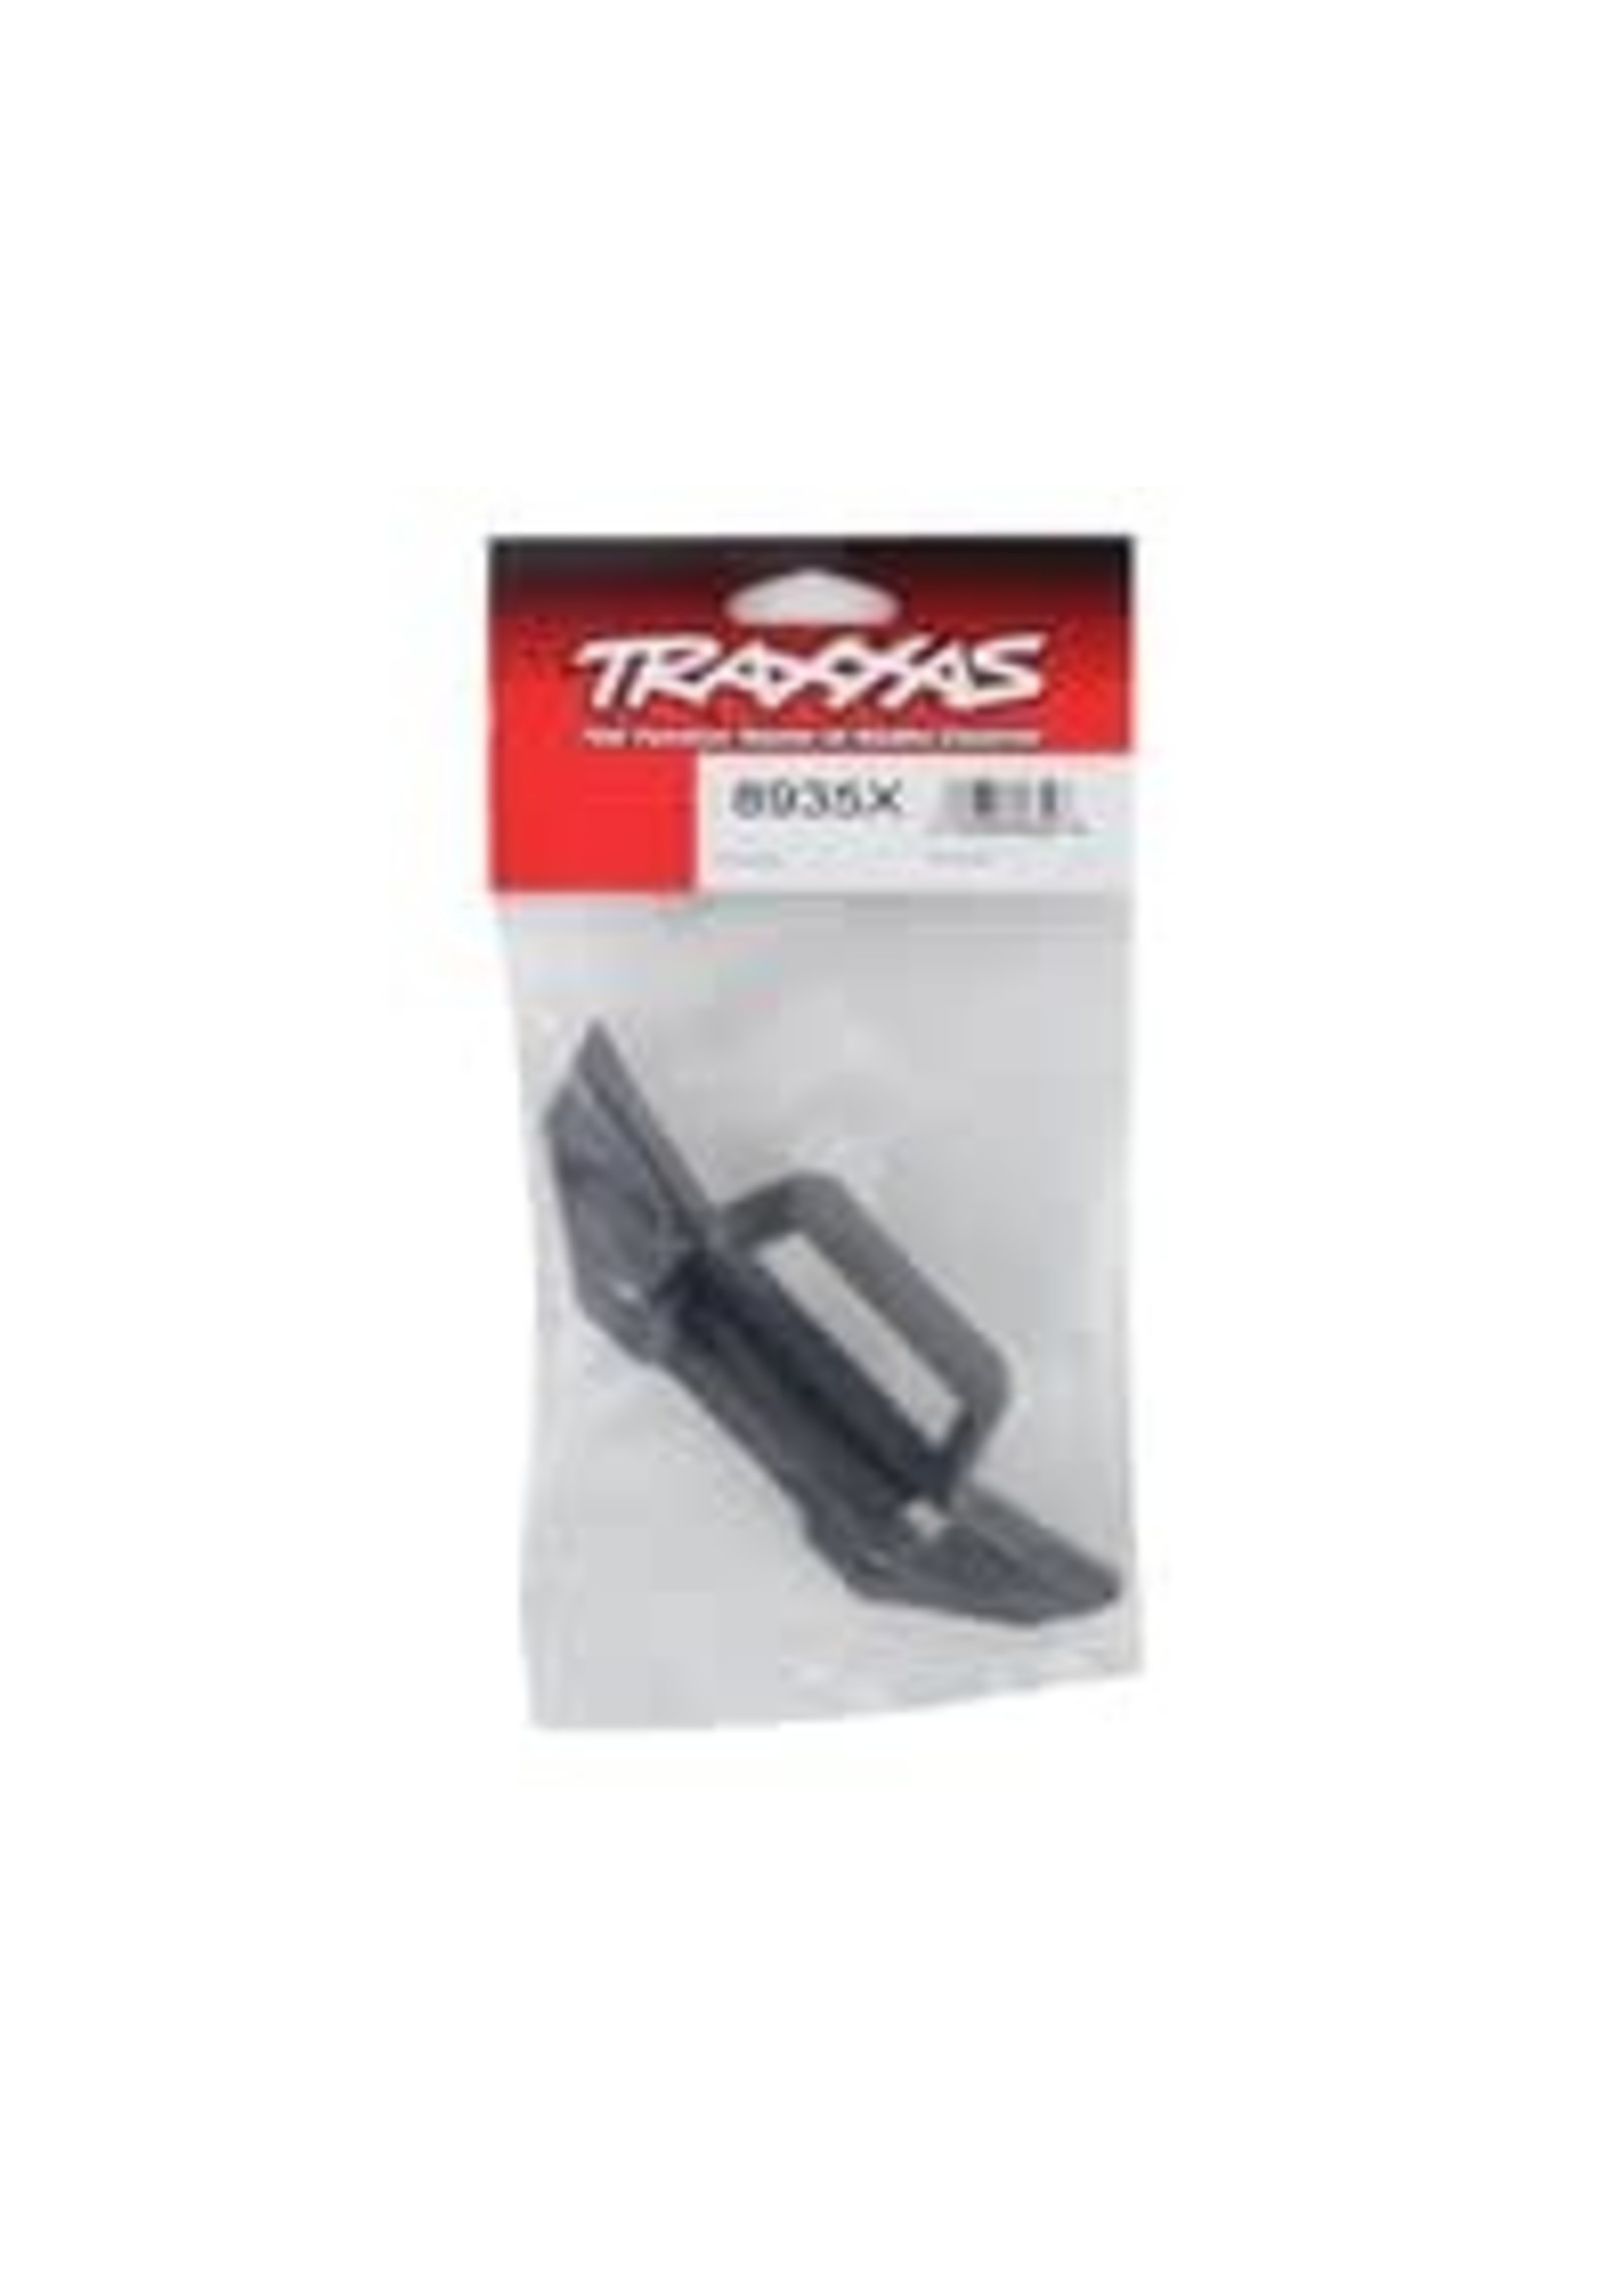 Traxxas 8935X Bumper, front (for use with #8990 LED light kit)